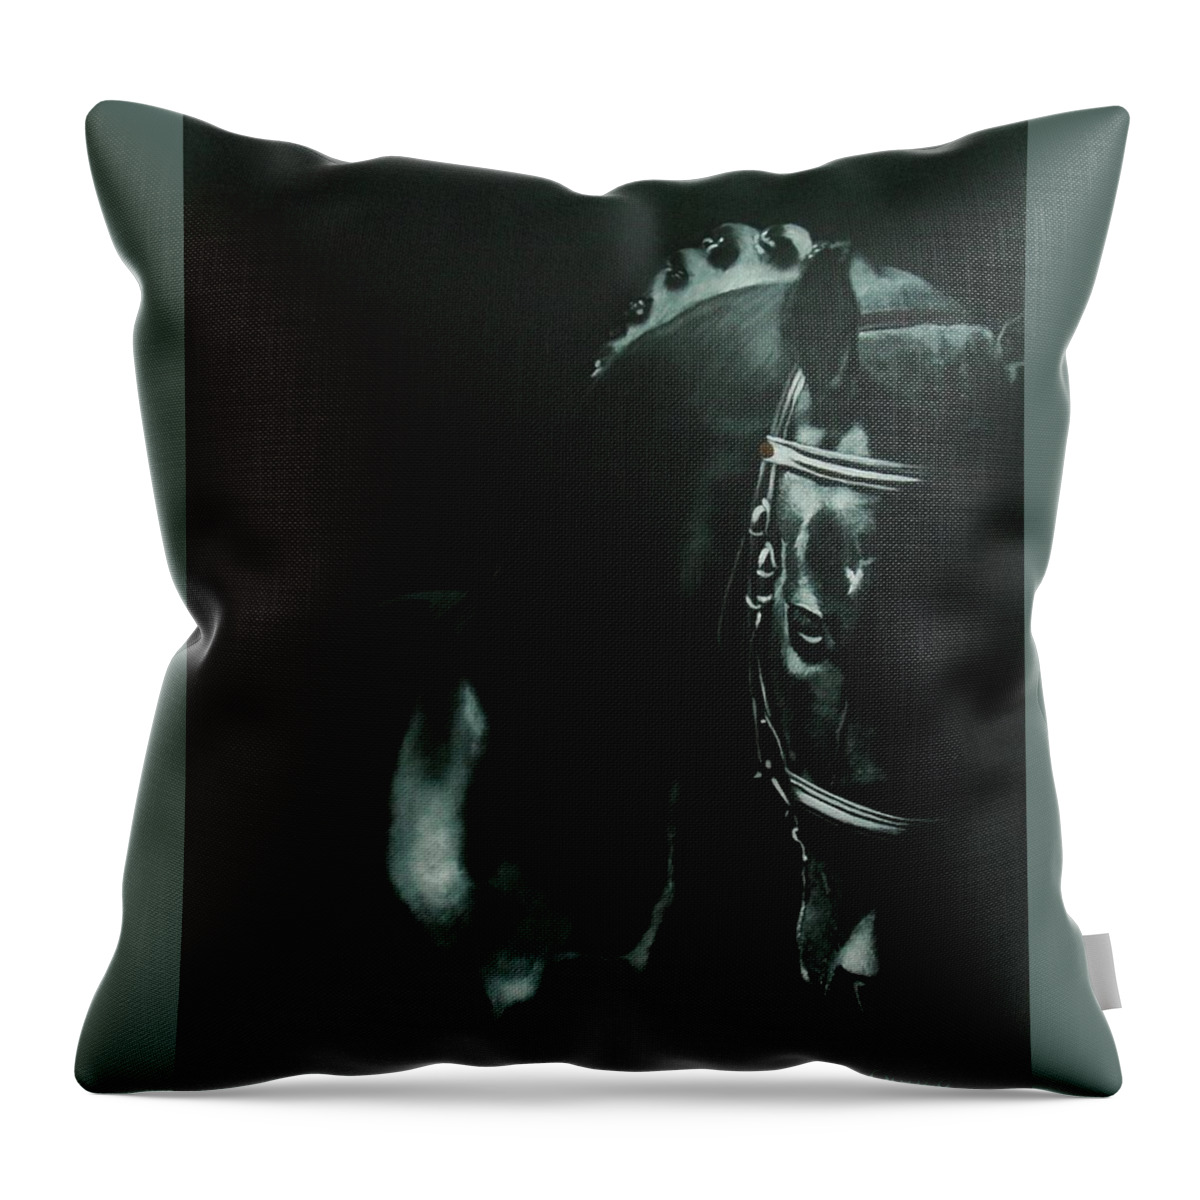 Horse Throw Pillow featuring the painting Elegance by Jean Yves Crispo